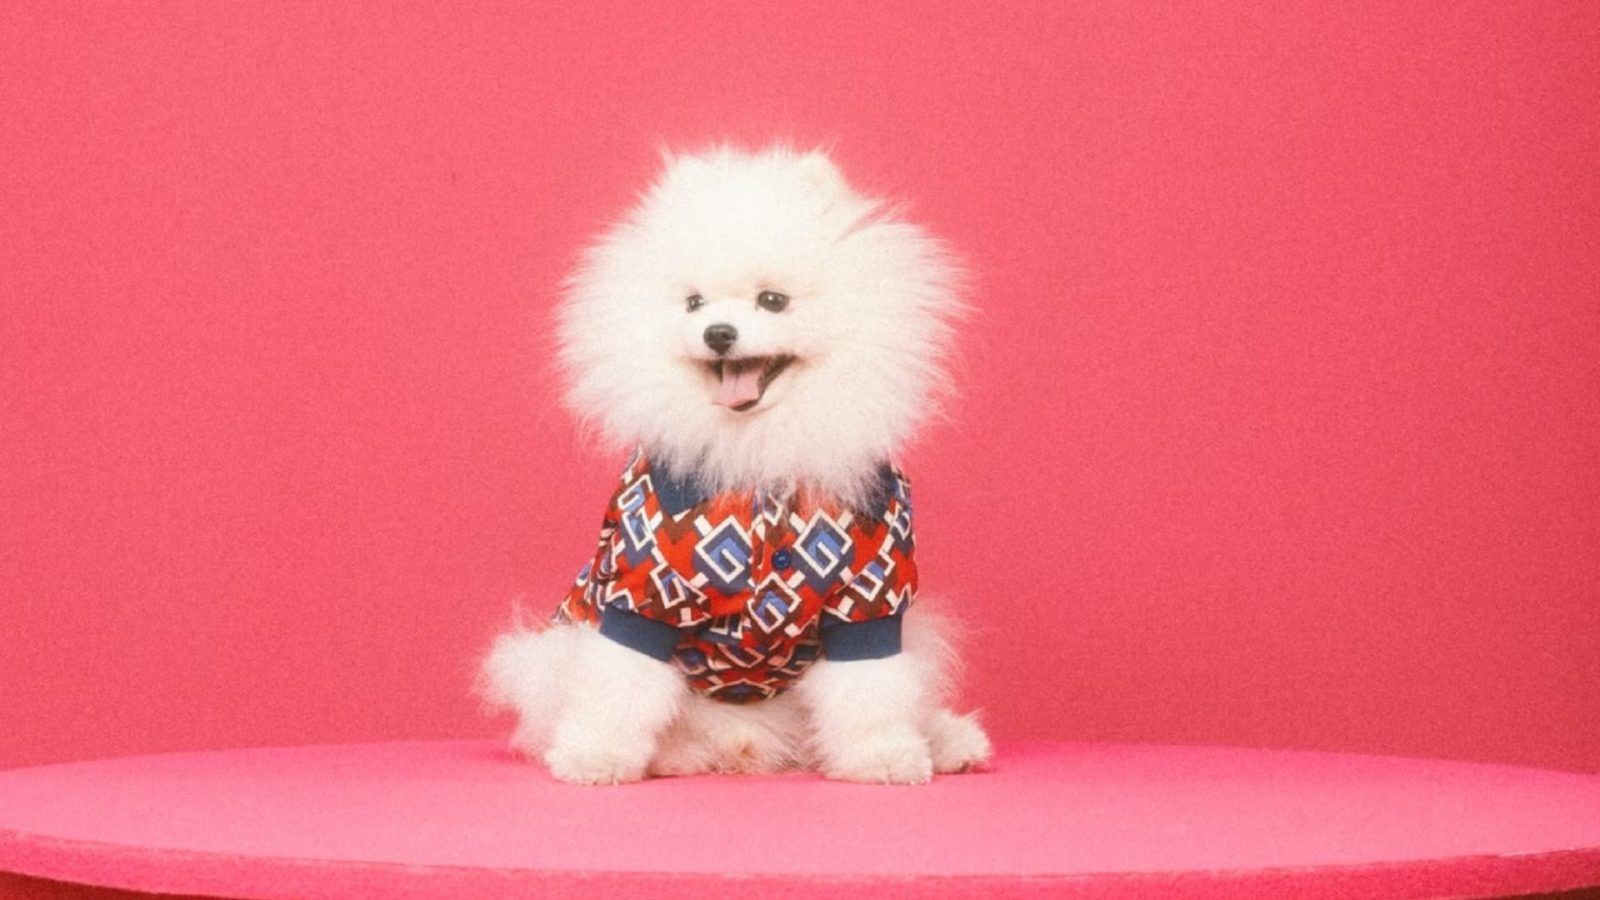 Gucci launches pet collection featuring clothes and accessories for your furry friends